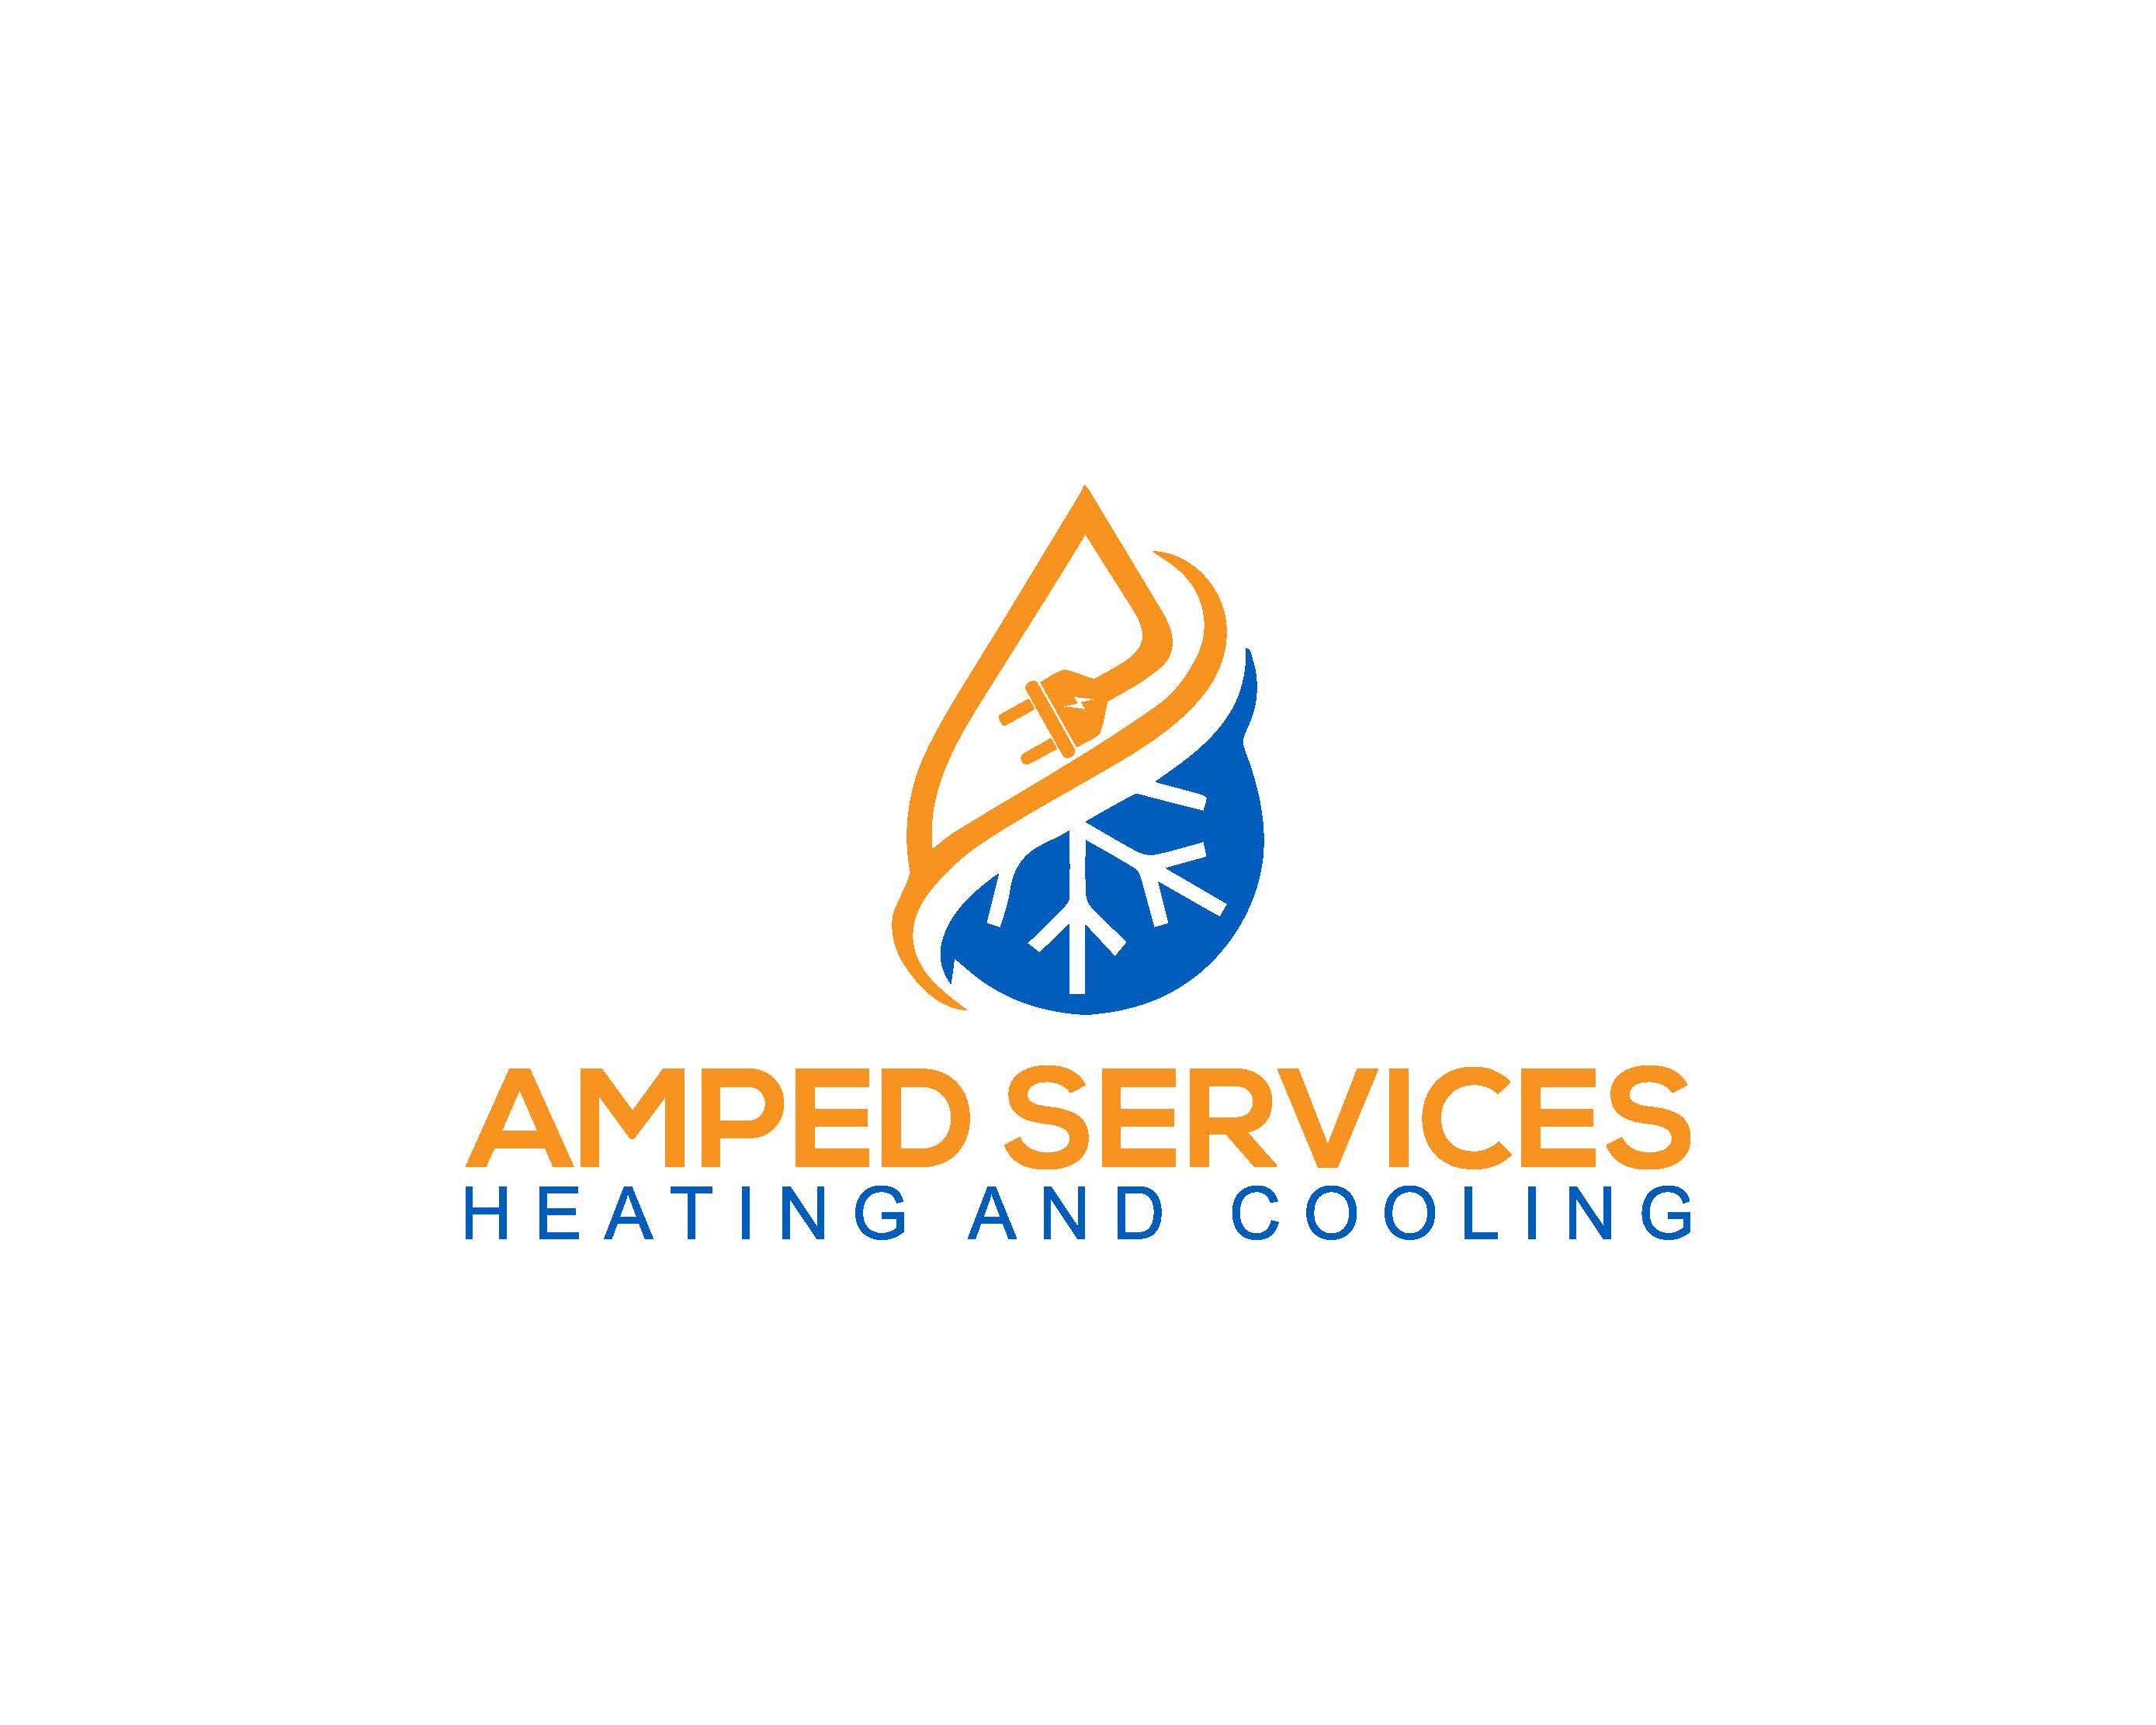 Amped Services Heating and Cooling